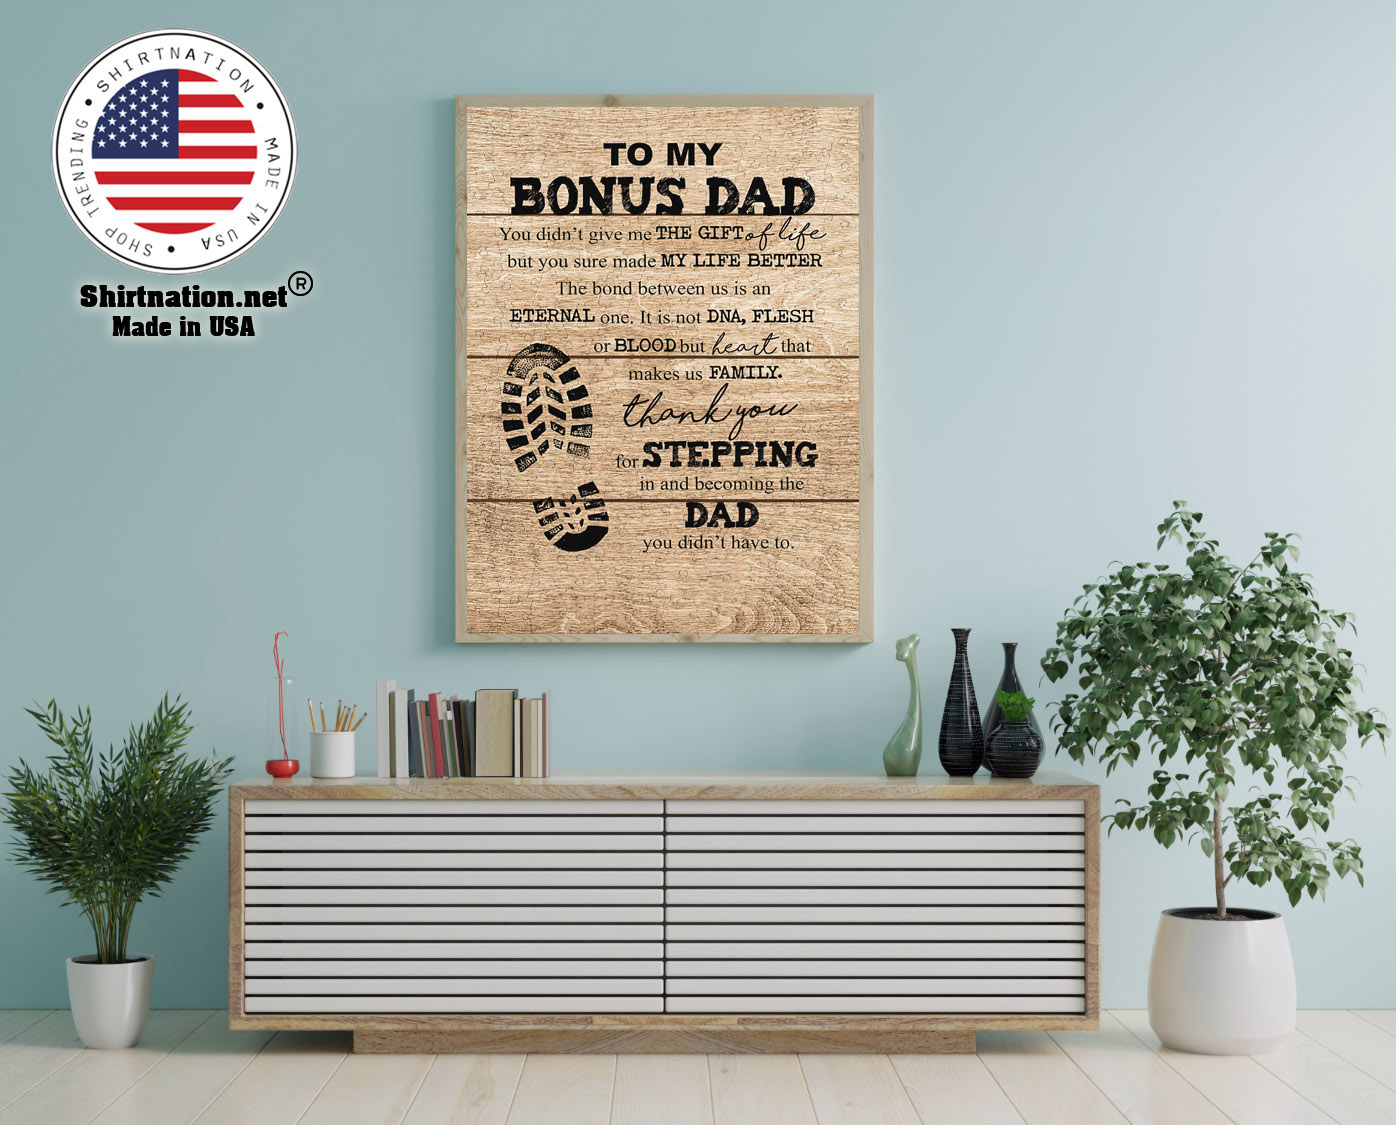 To my bonus dad you didnt give me the gift of life but you sure made my life better poster 12